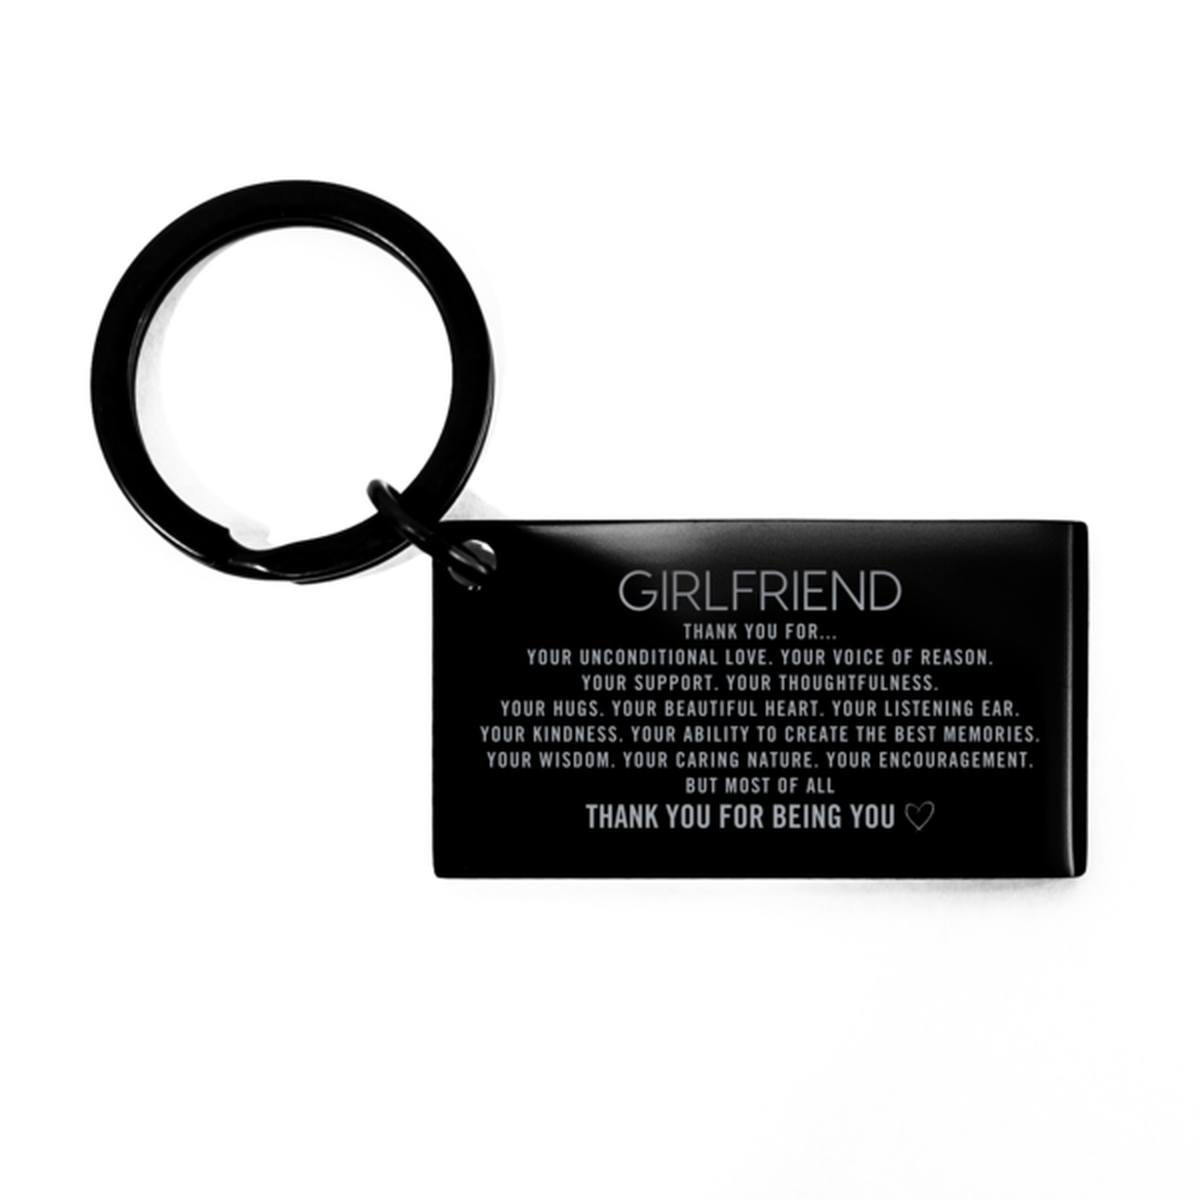 Girlfriend Keychain Custom, Engraved Gifts For Girlfriend Christmas Graduation Birthday Gifts for Men Women Girlfriend Thank you for Your unconditional love